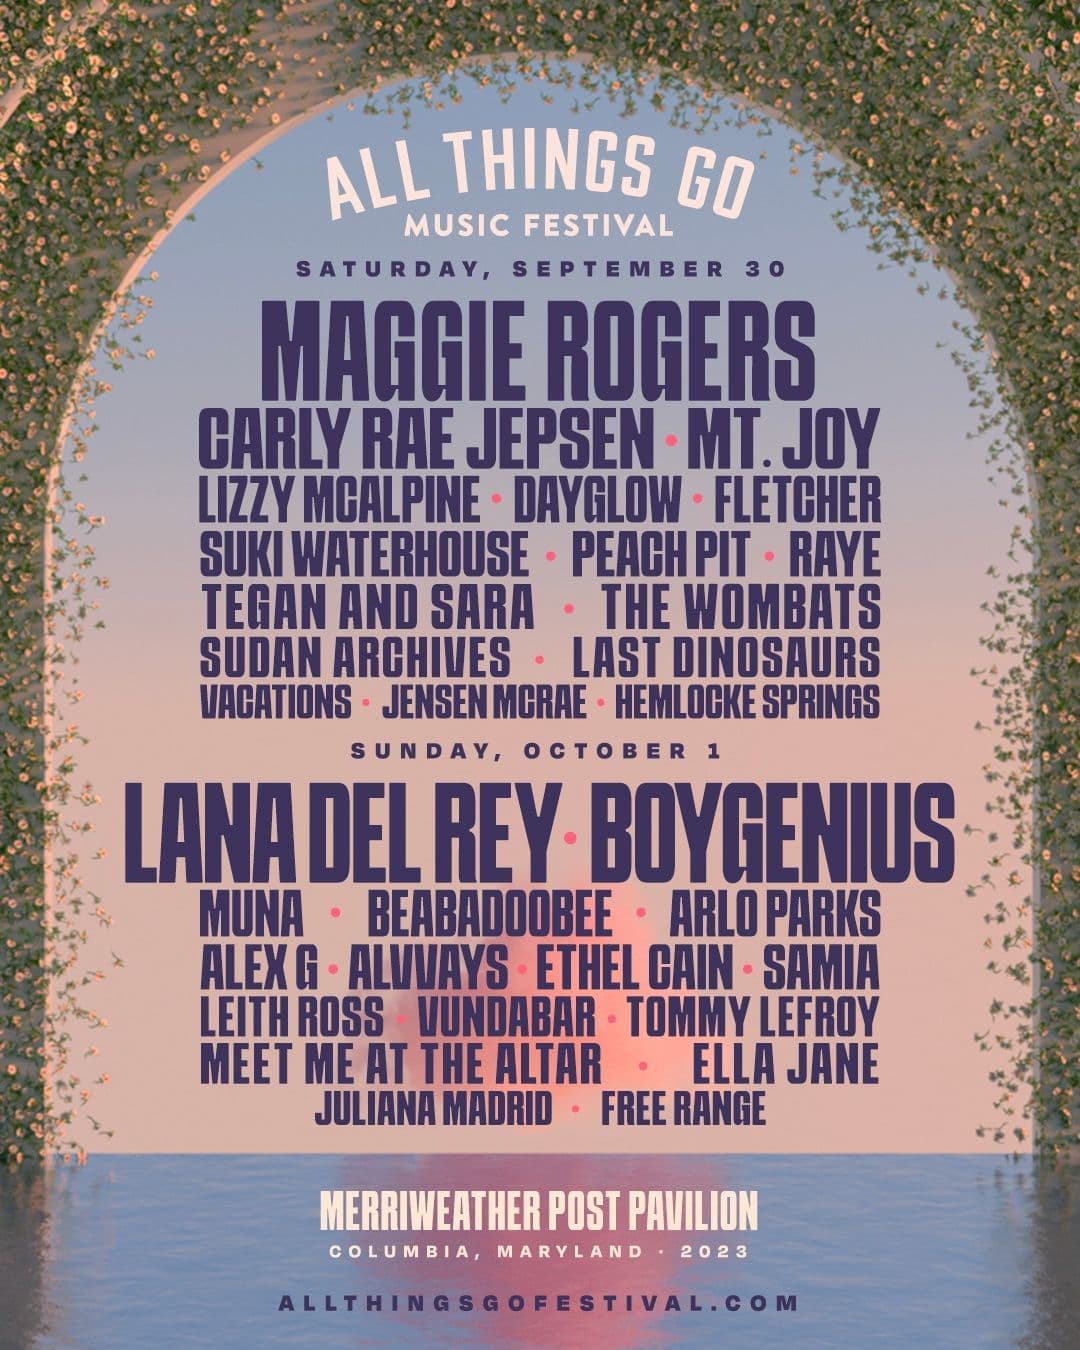 All Things Go 2023 Lineup